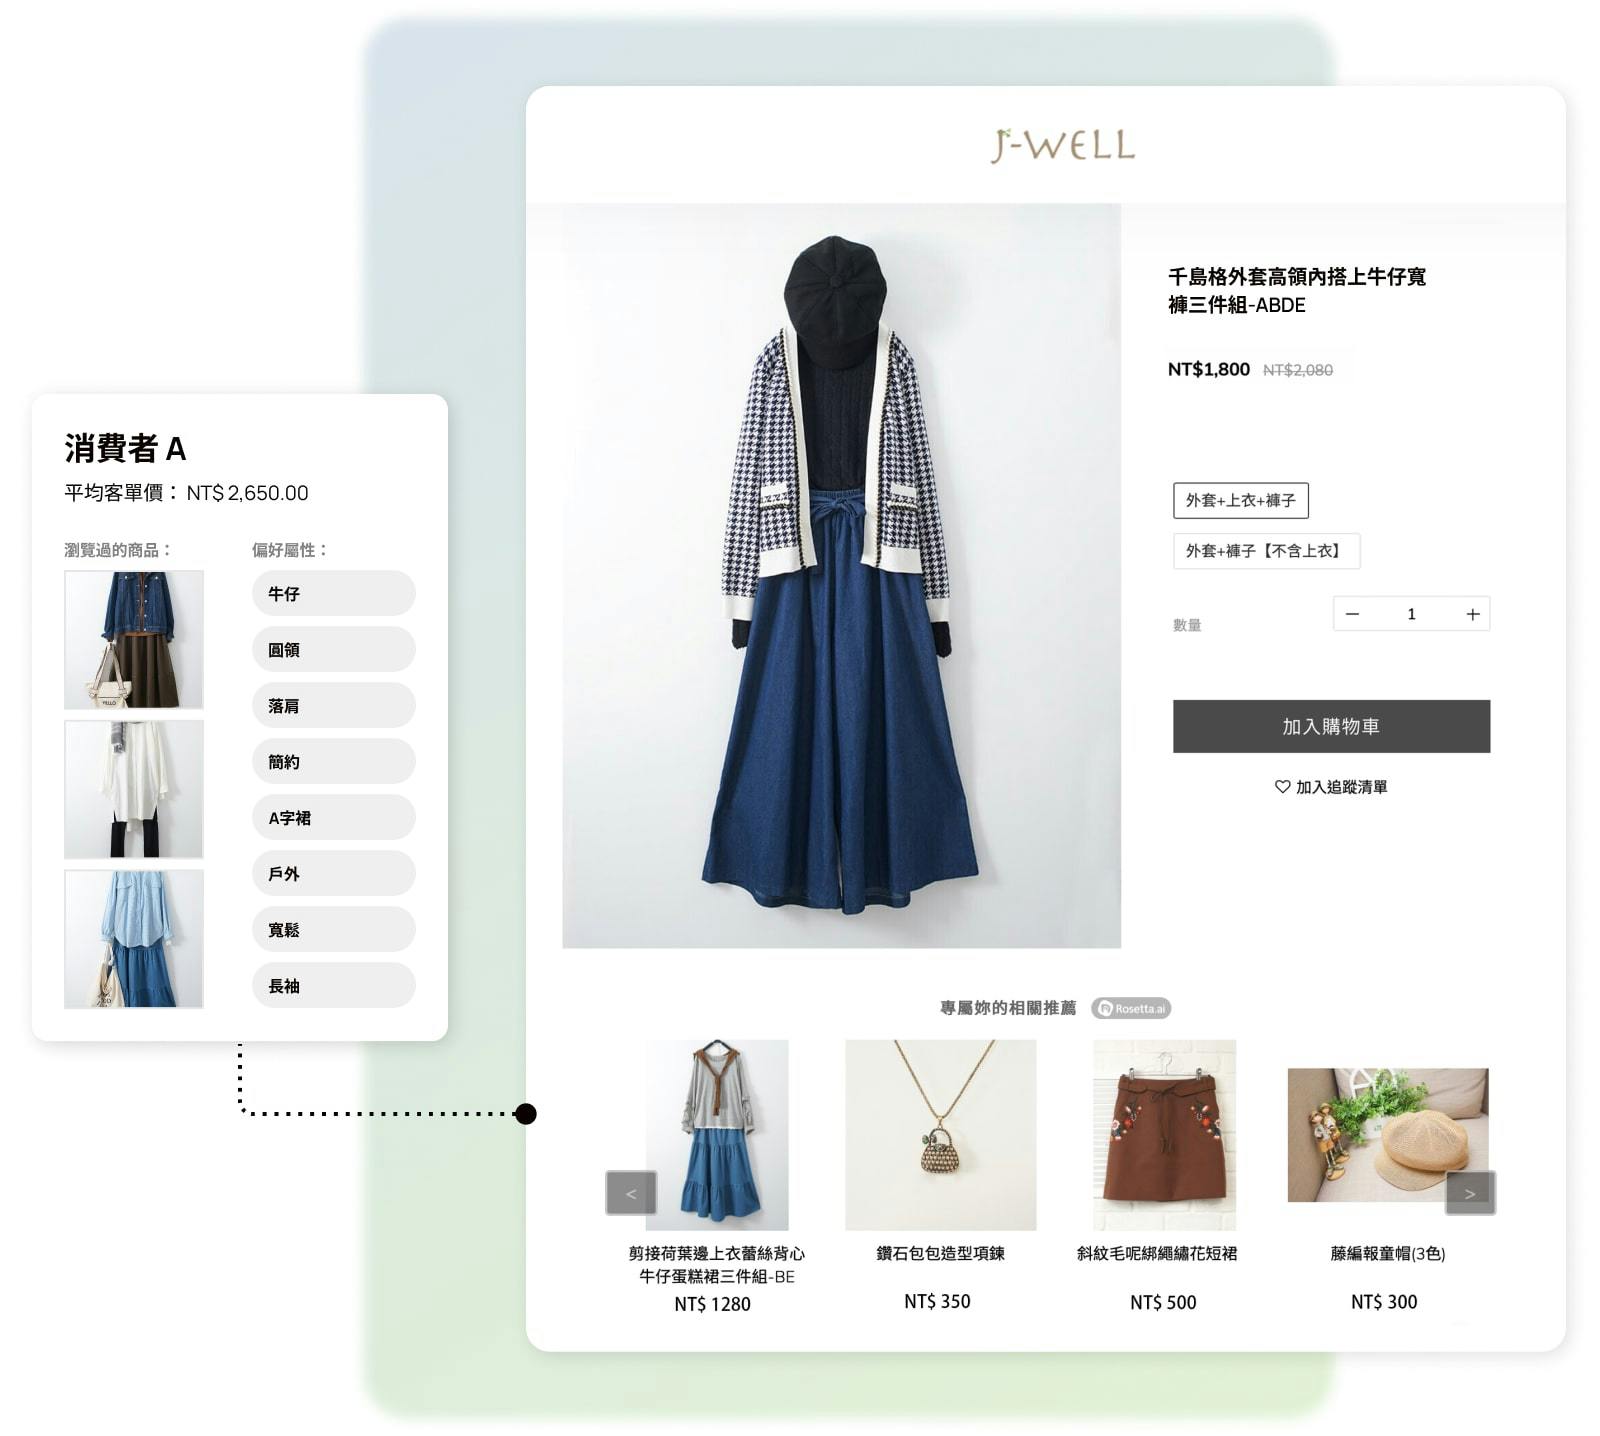 Rosetta AI helps fashion shoppers discover the products they love.